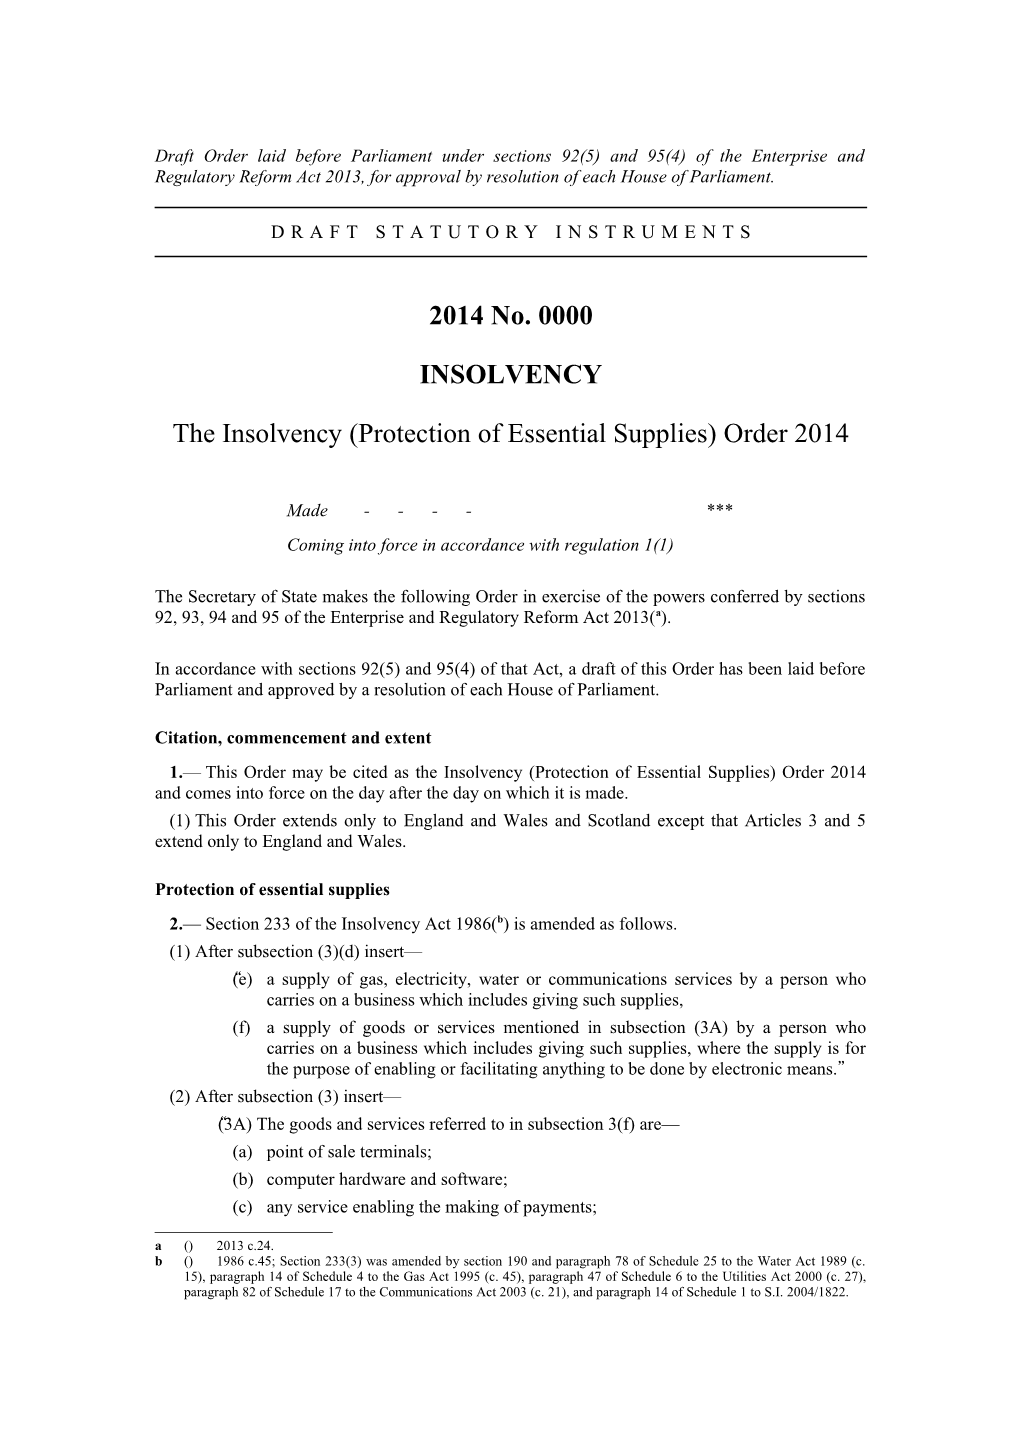 The Insolvency (Protection of Essential Supplies) Order 2014